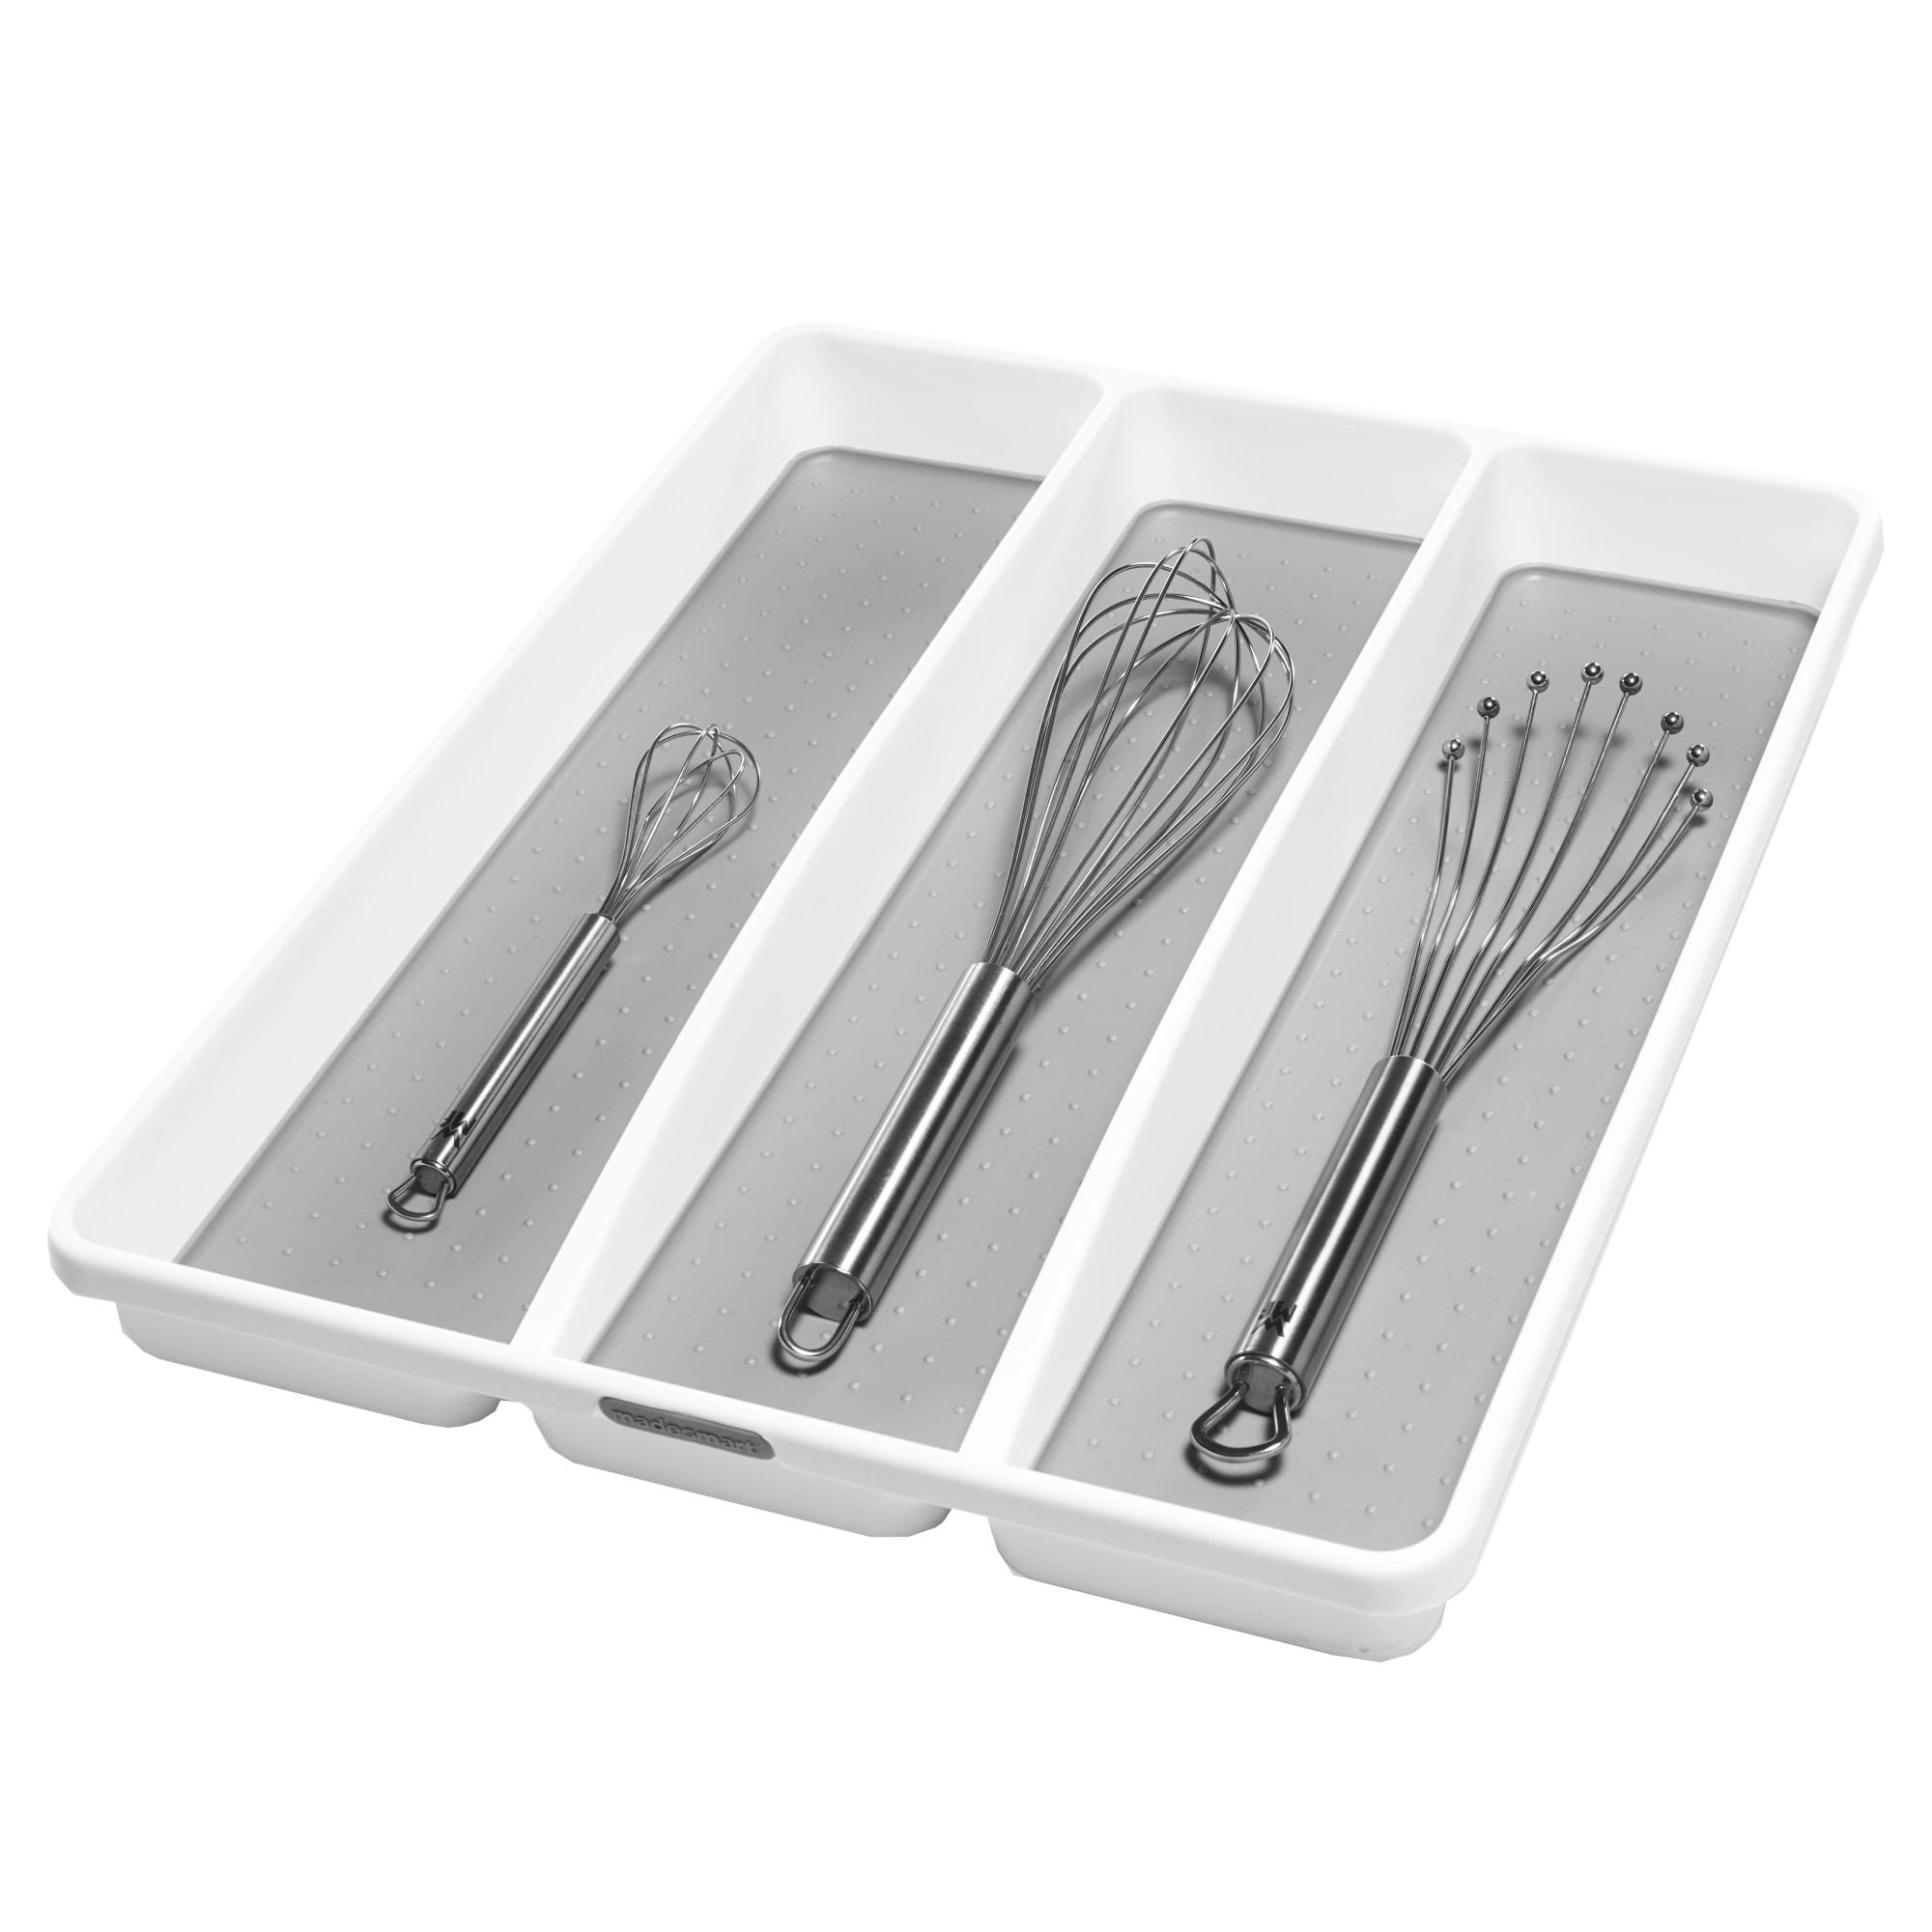 Madesmart Utensil Tray 3 Compartment White Image 2